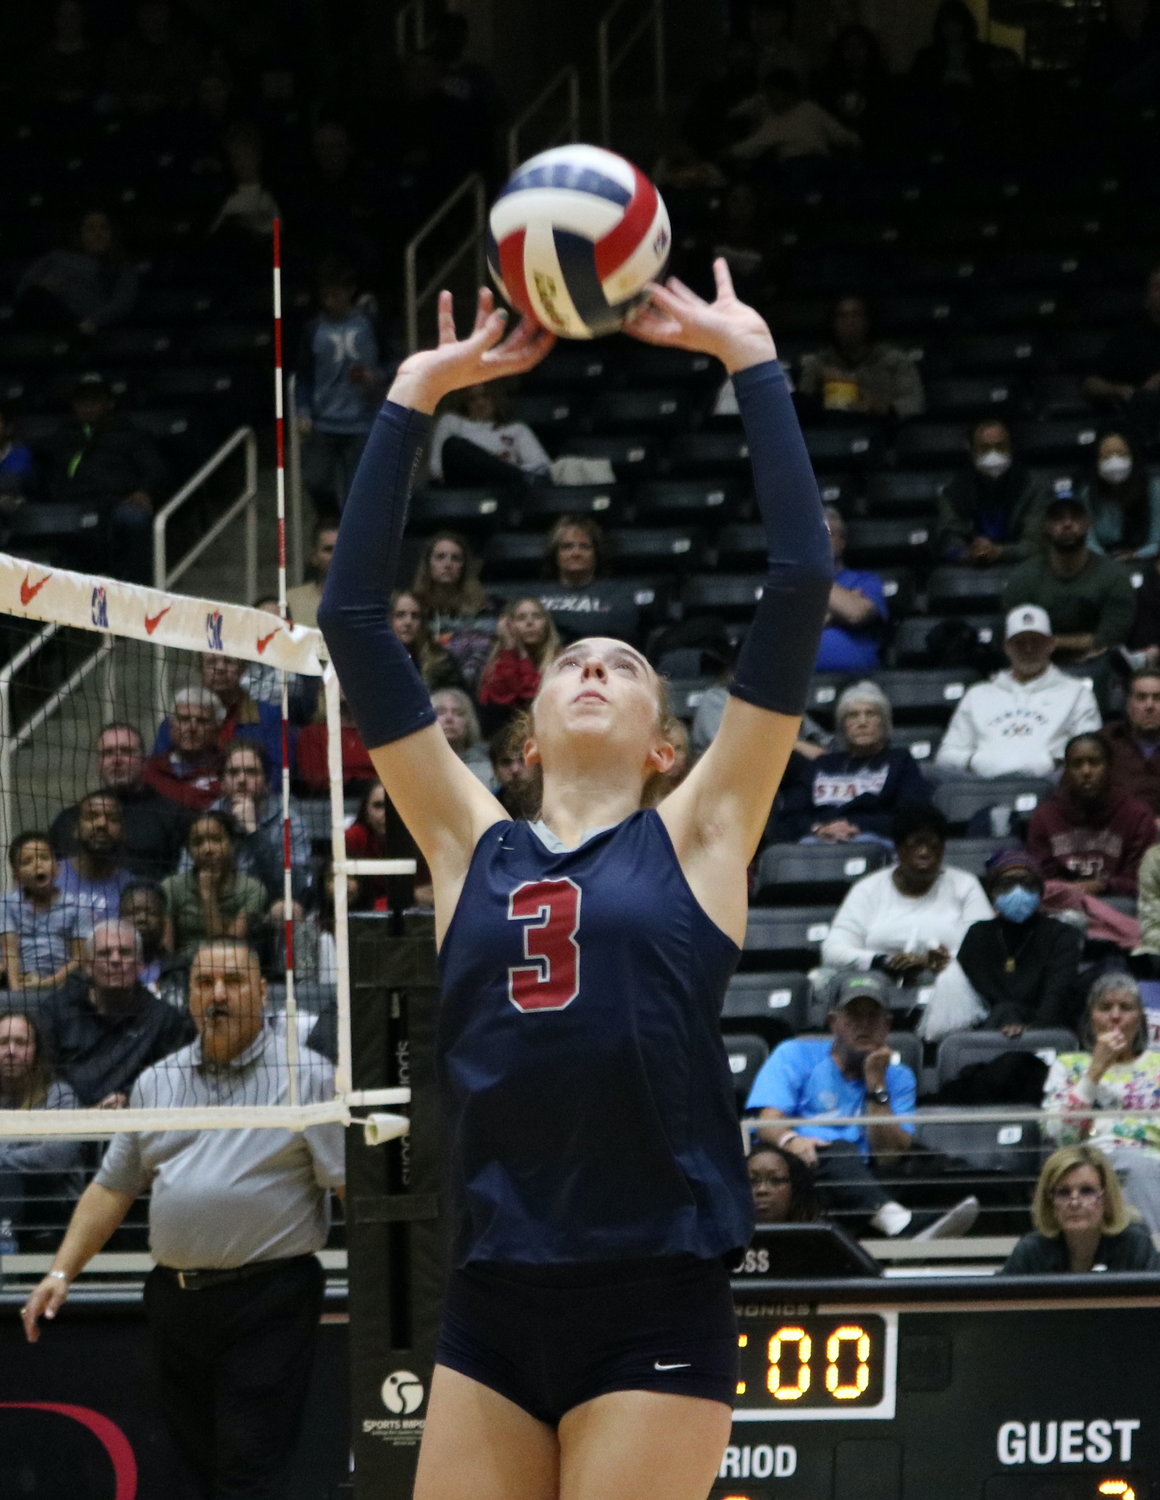 Presley Powell sets a ball during Saturday's state final between Tompkins and Dripping Springs at the Curtis Culwell Center in Garland.